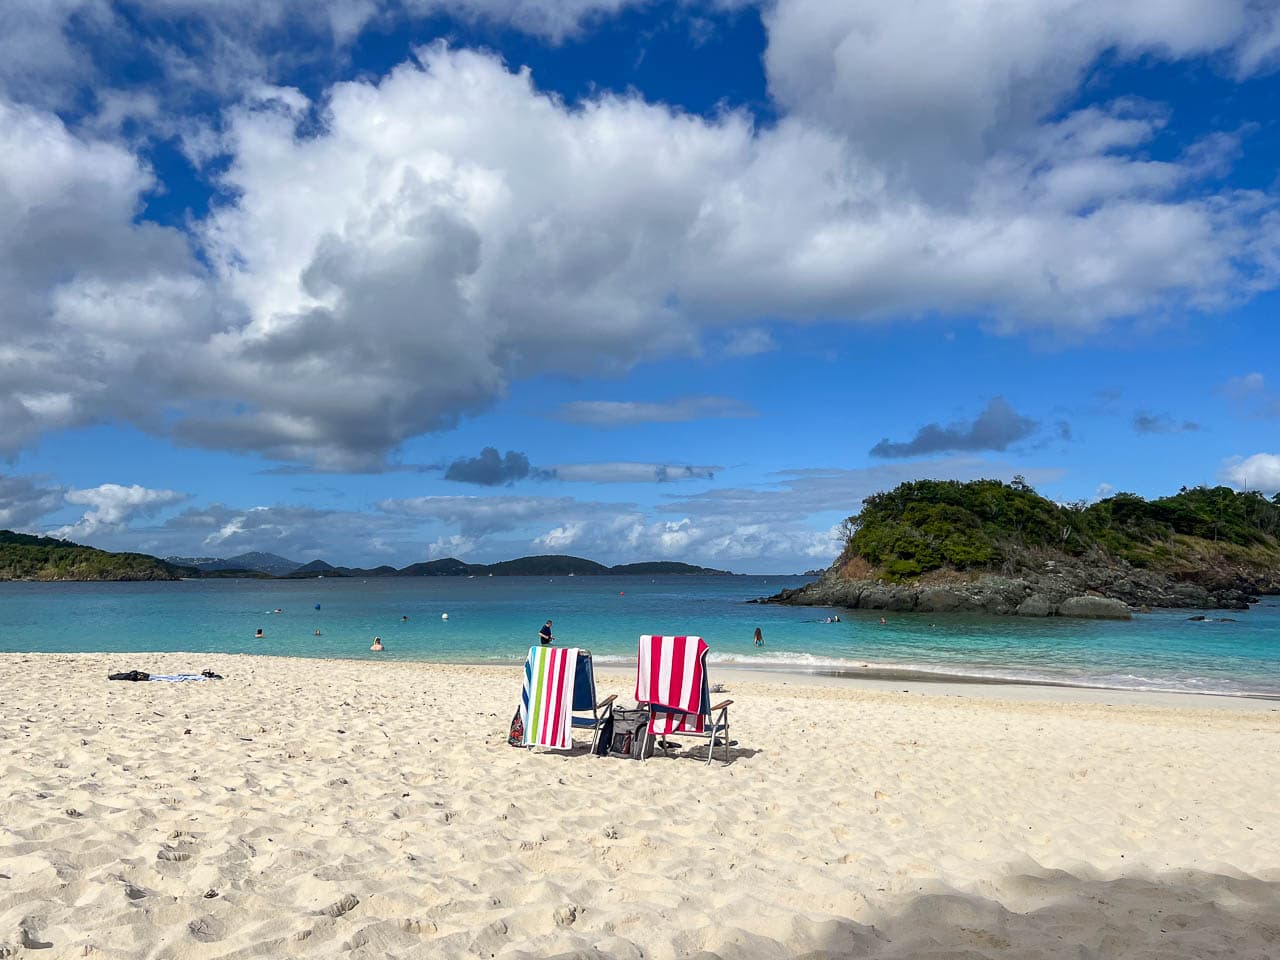 Beach chairs at Trunk Bay Beach, one of the most beautiful beaches in Virgin Islands National Park